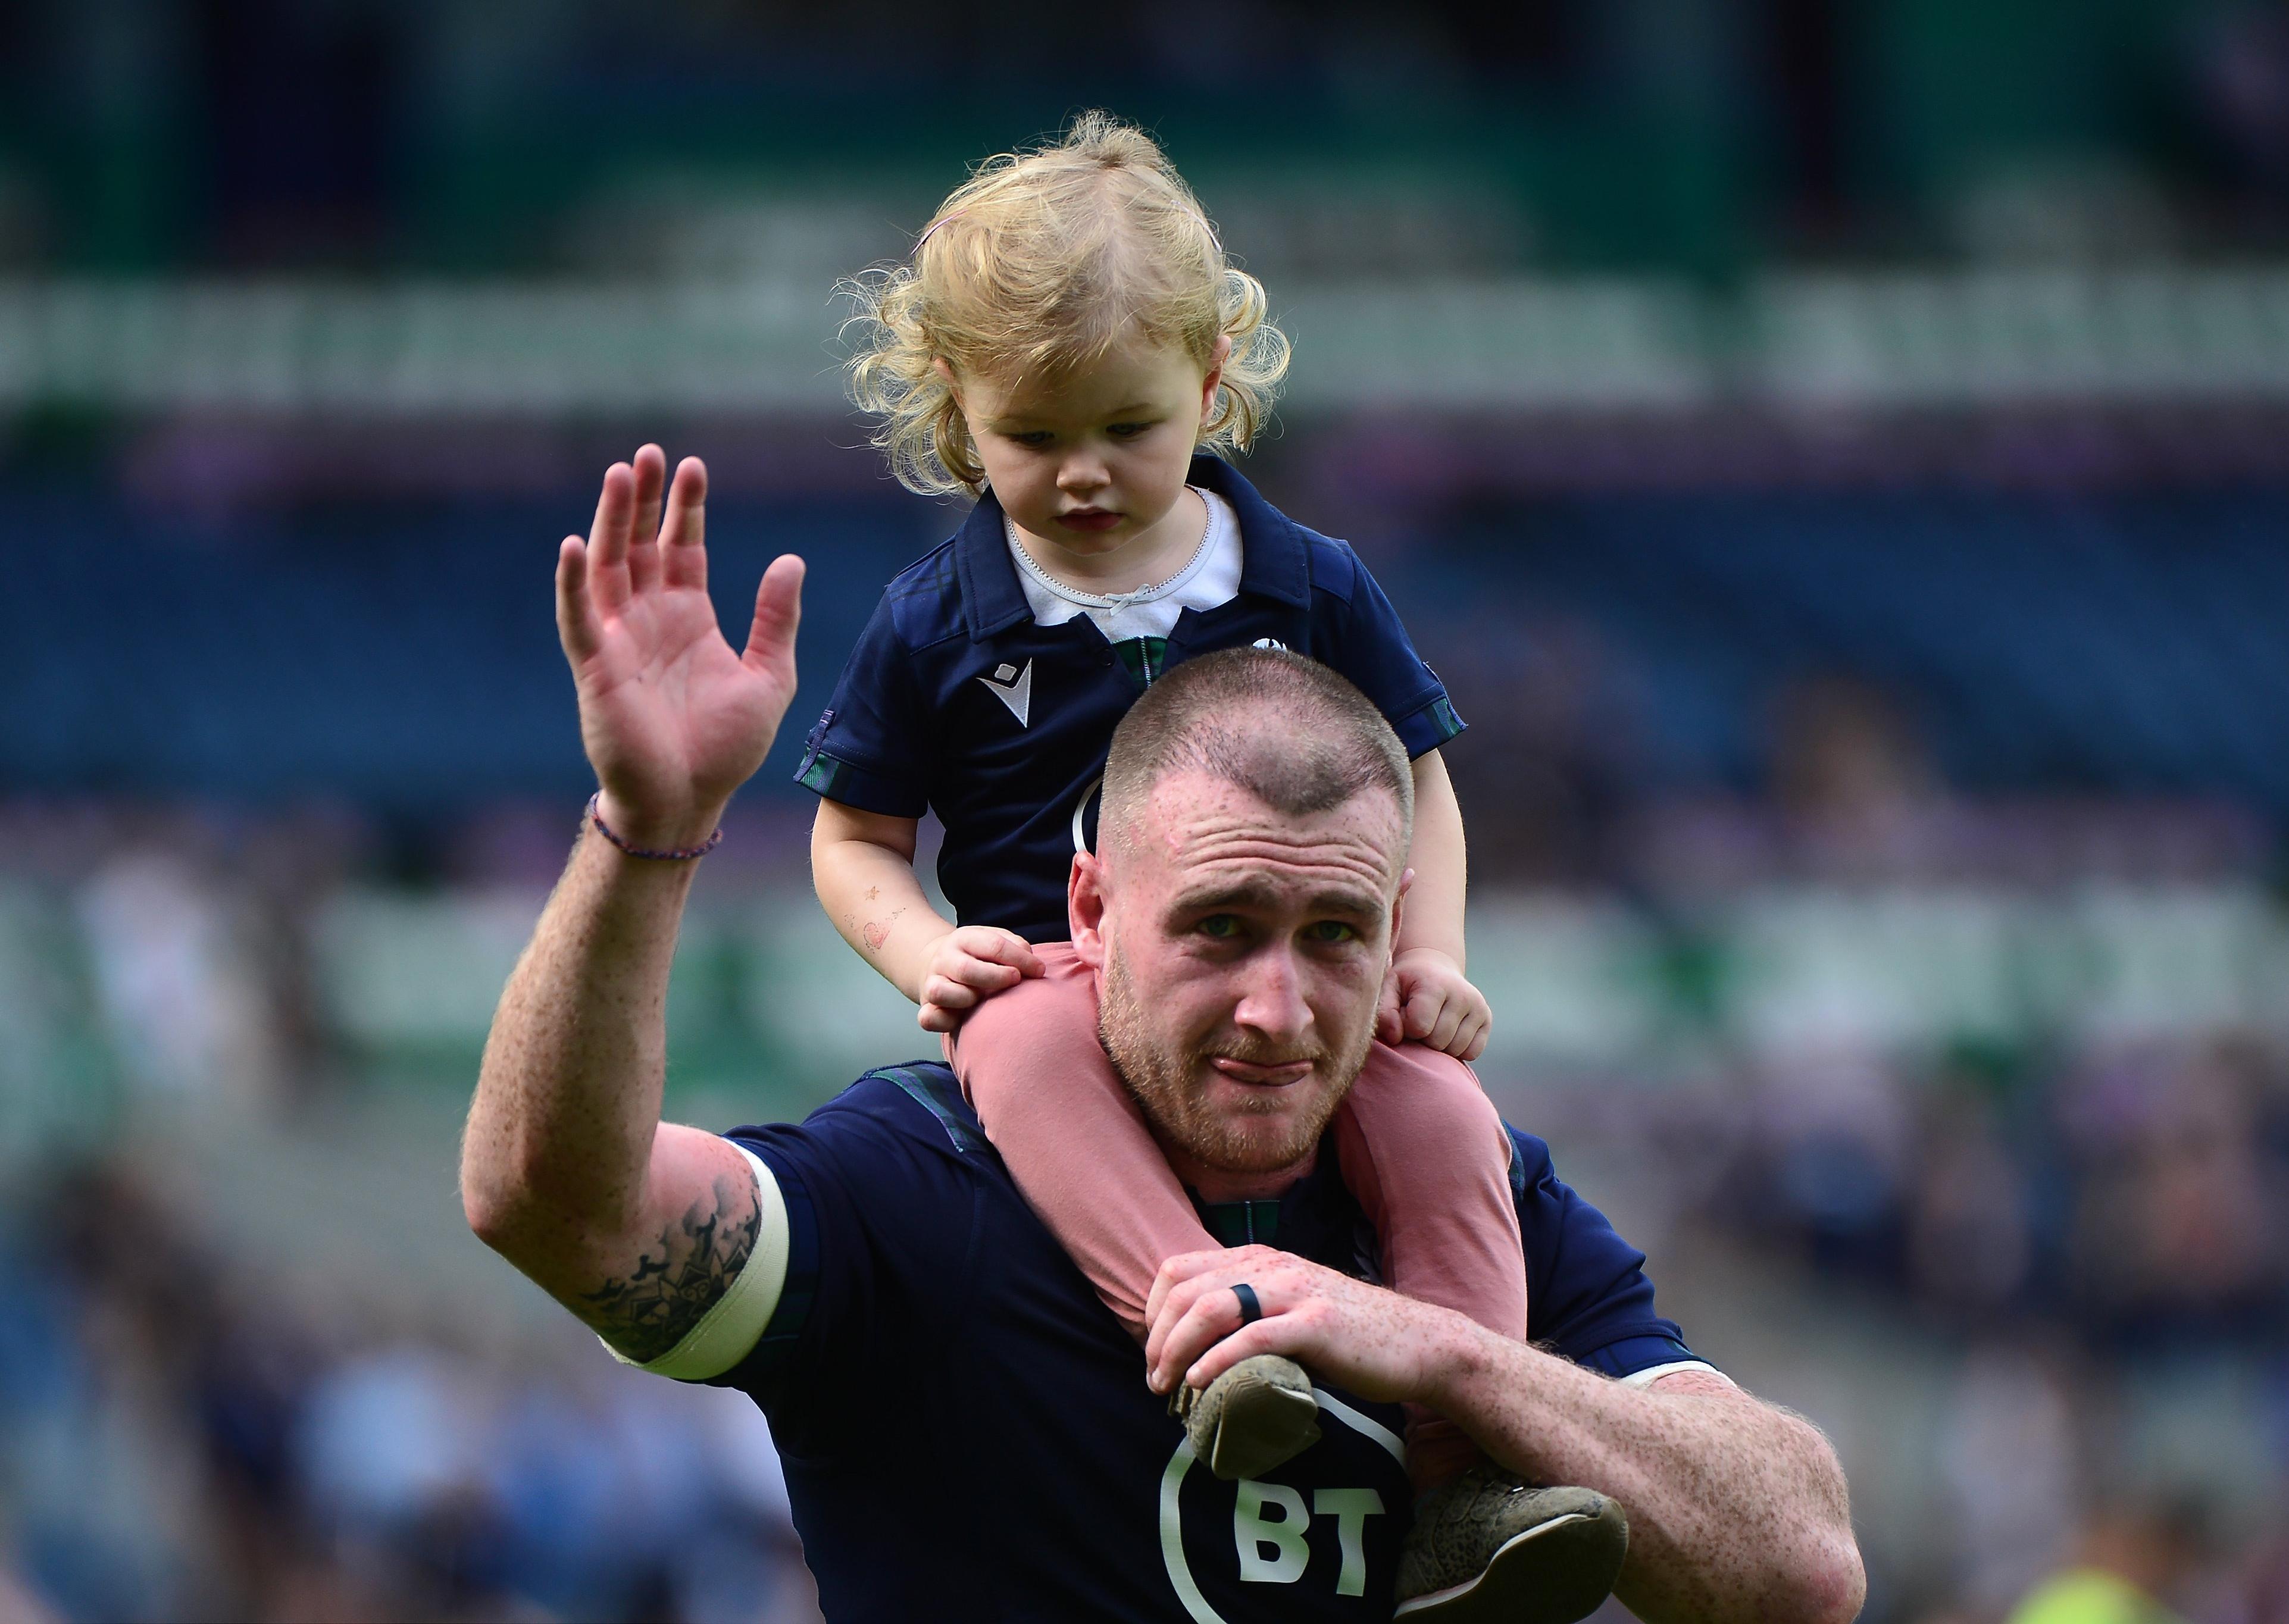 EDINBURGH, SCOTLAND - AUGUST 24: Stuart Hogg of Scotland with his daughter Olivia at the final whistle during the Summer Test match between Scotland and France at Murrayfield Stadium on August 24, 2019 in Edinburgh, Scotland. (Photo by Mark Runnacles/Getty Images)